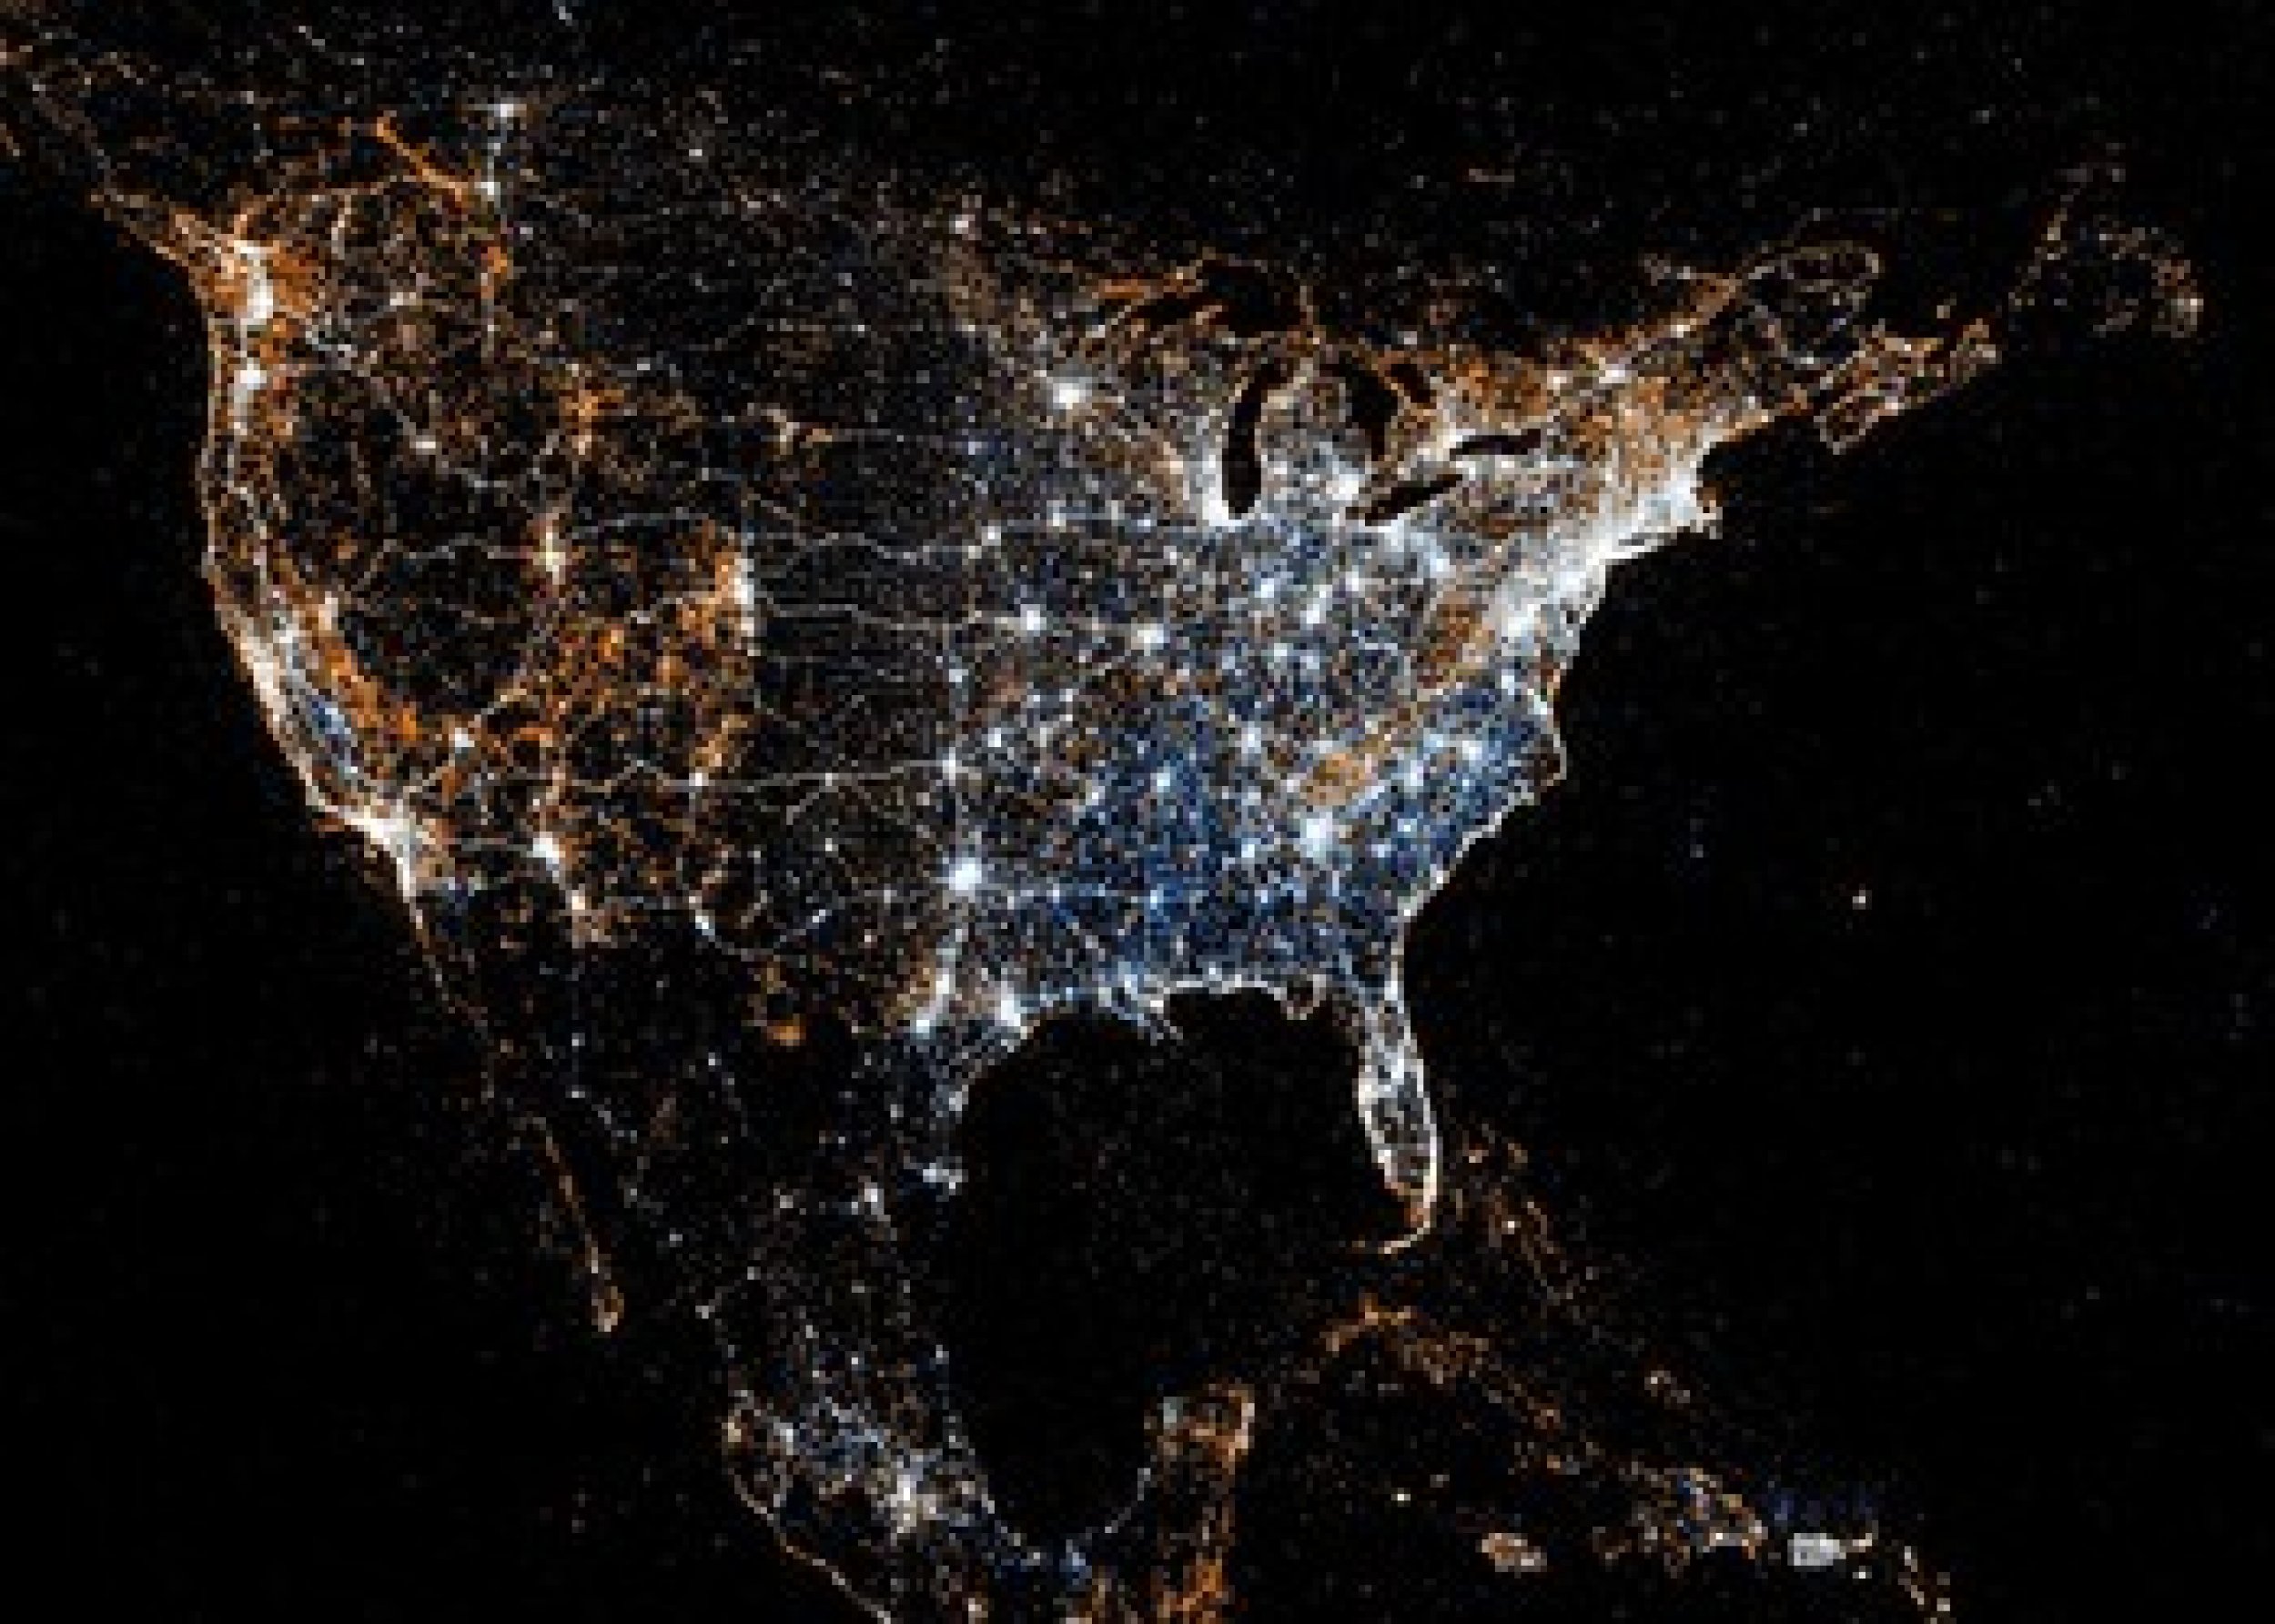 Map showing Twitter, Flickr usage in U.S.